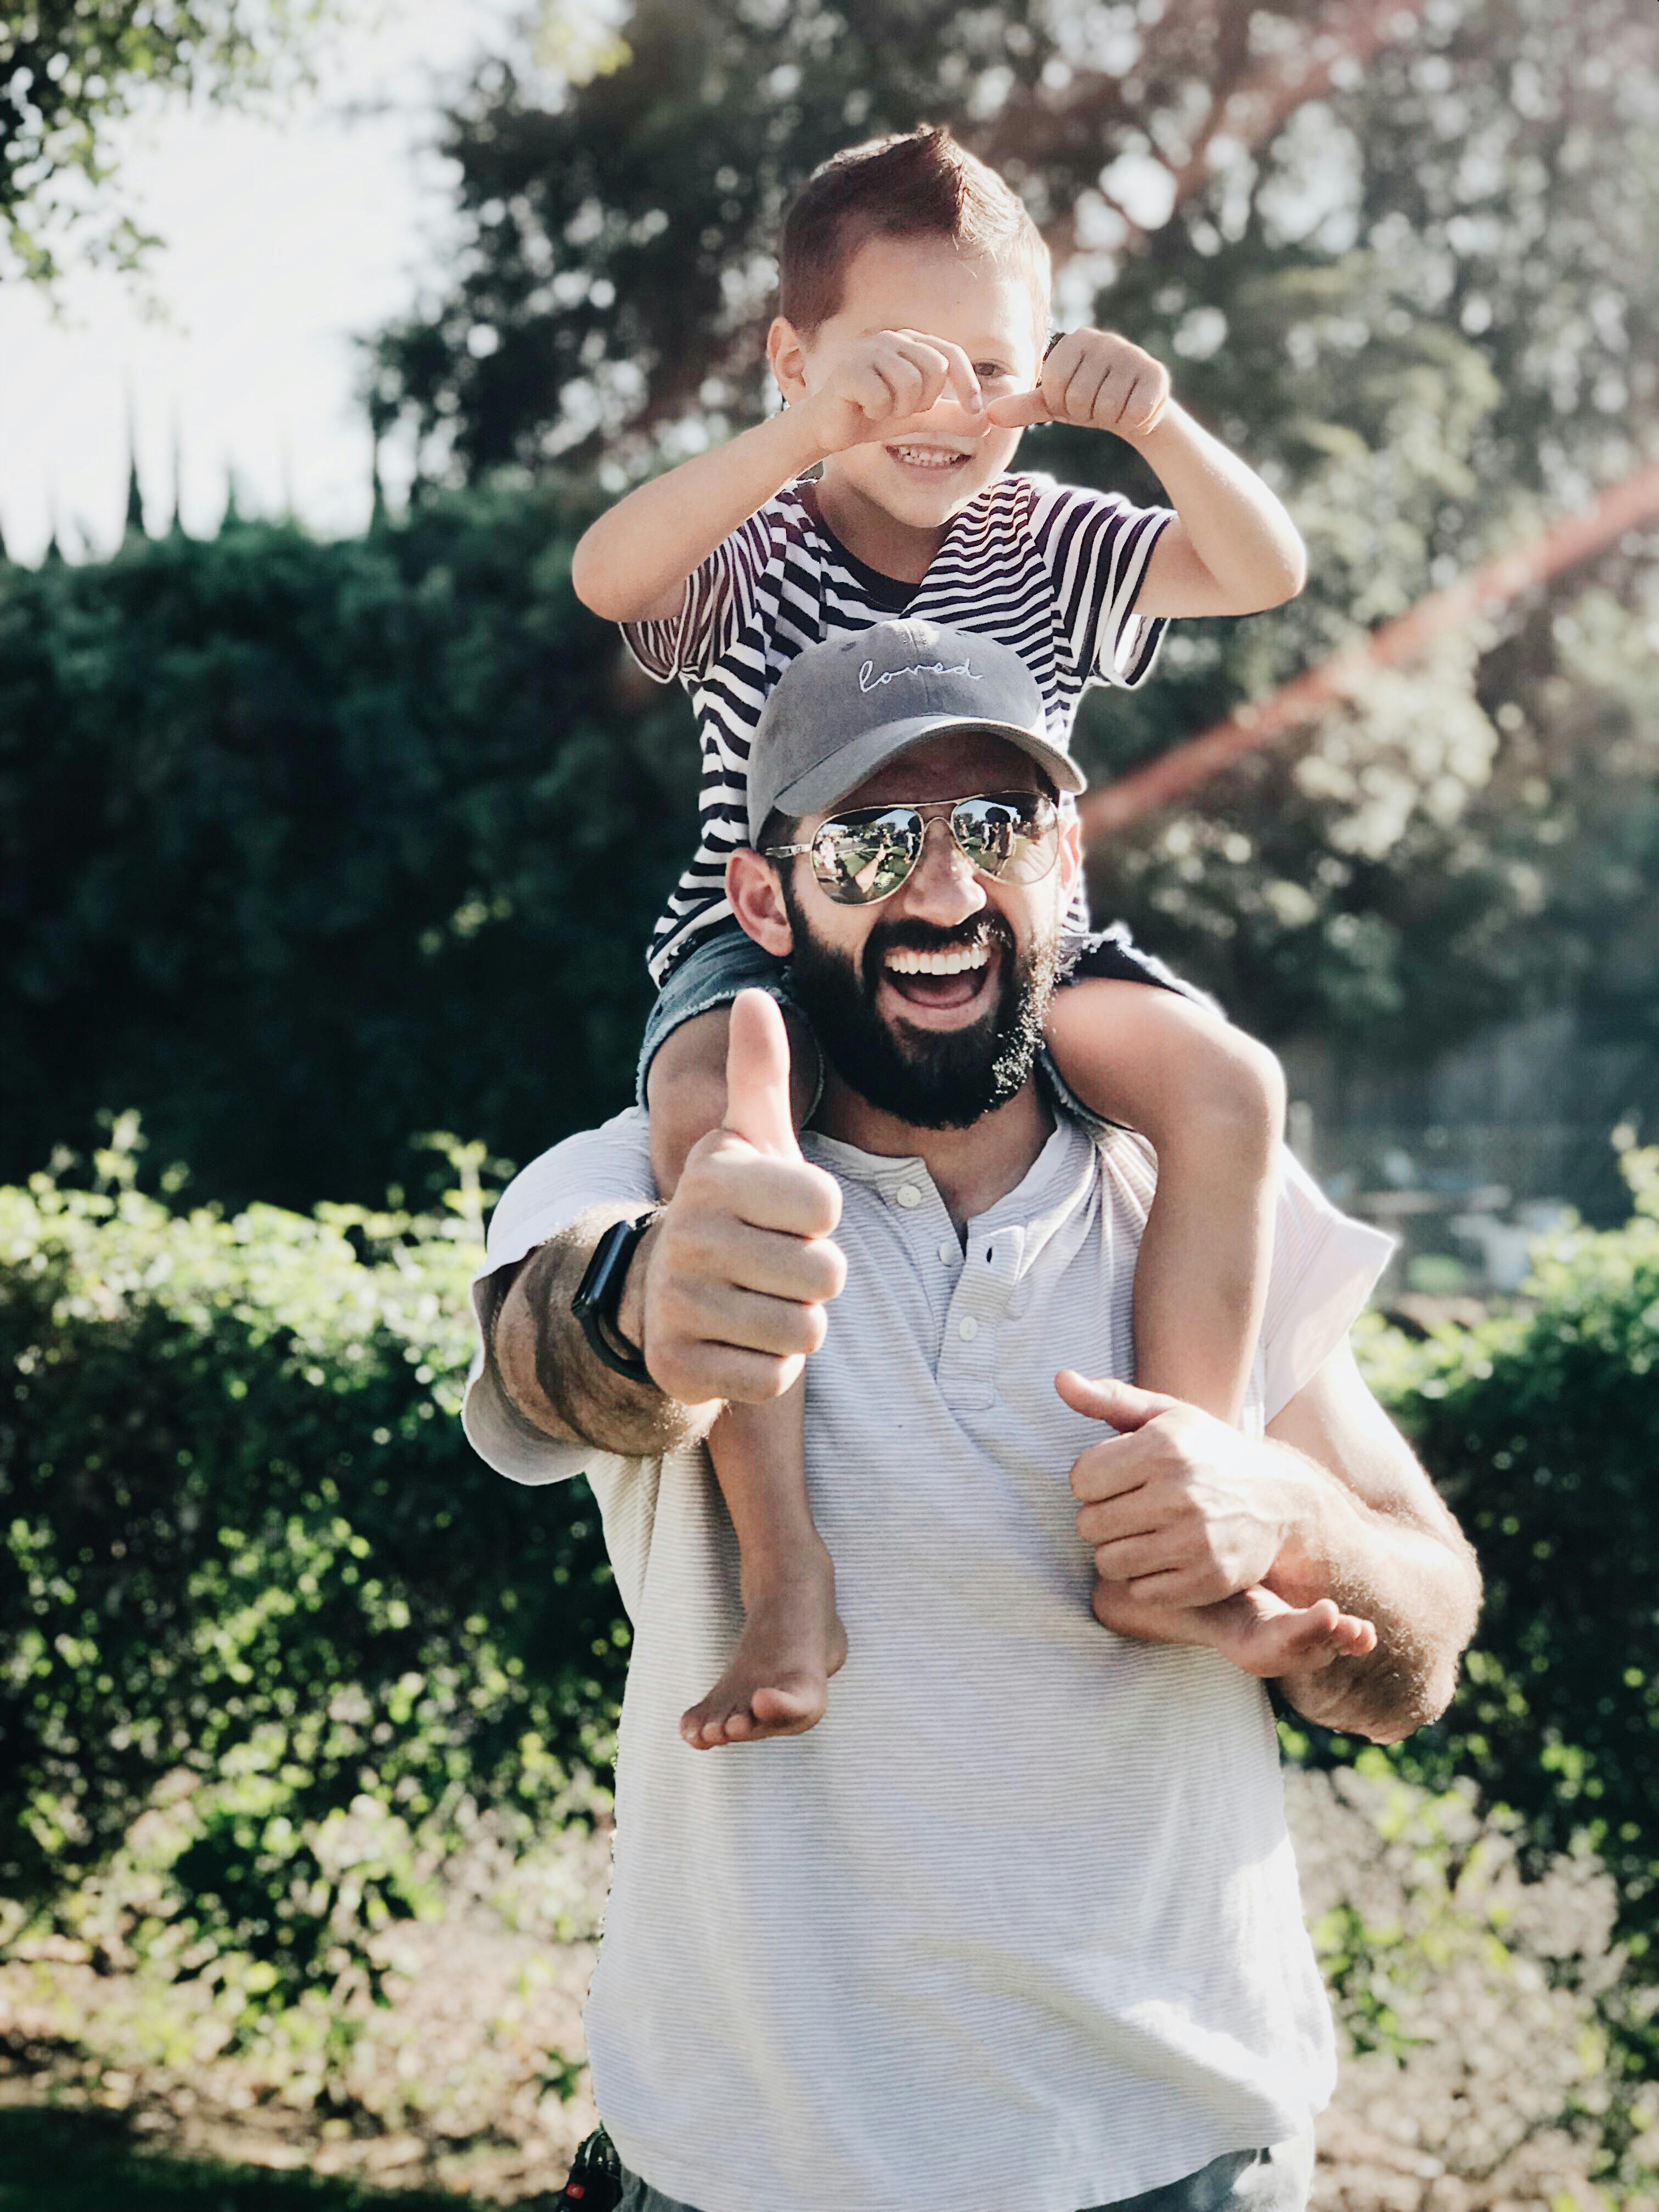 A man posing with a little boy on his shoulders | Source: Pexels